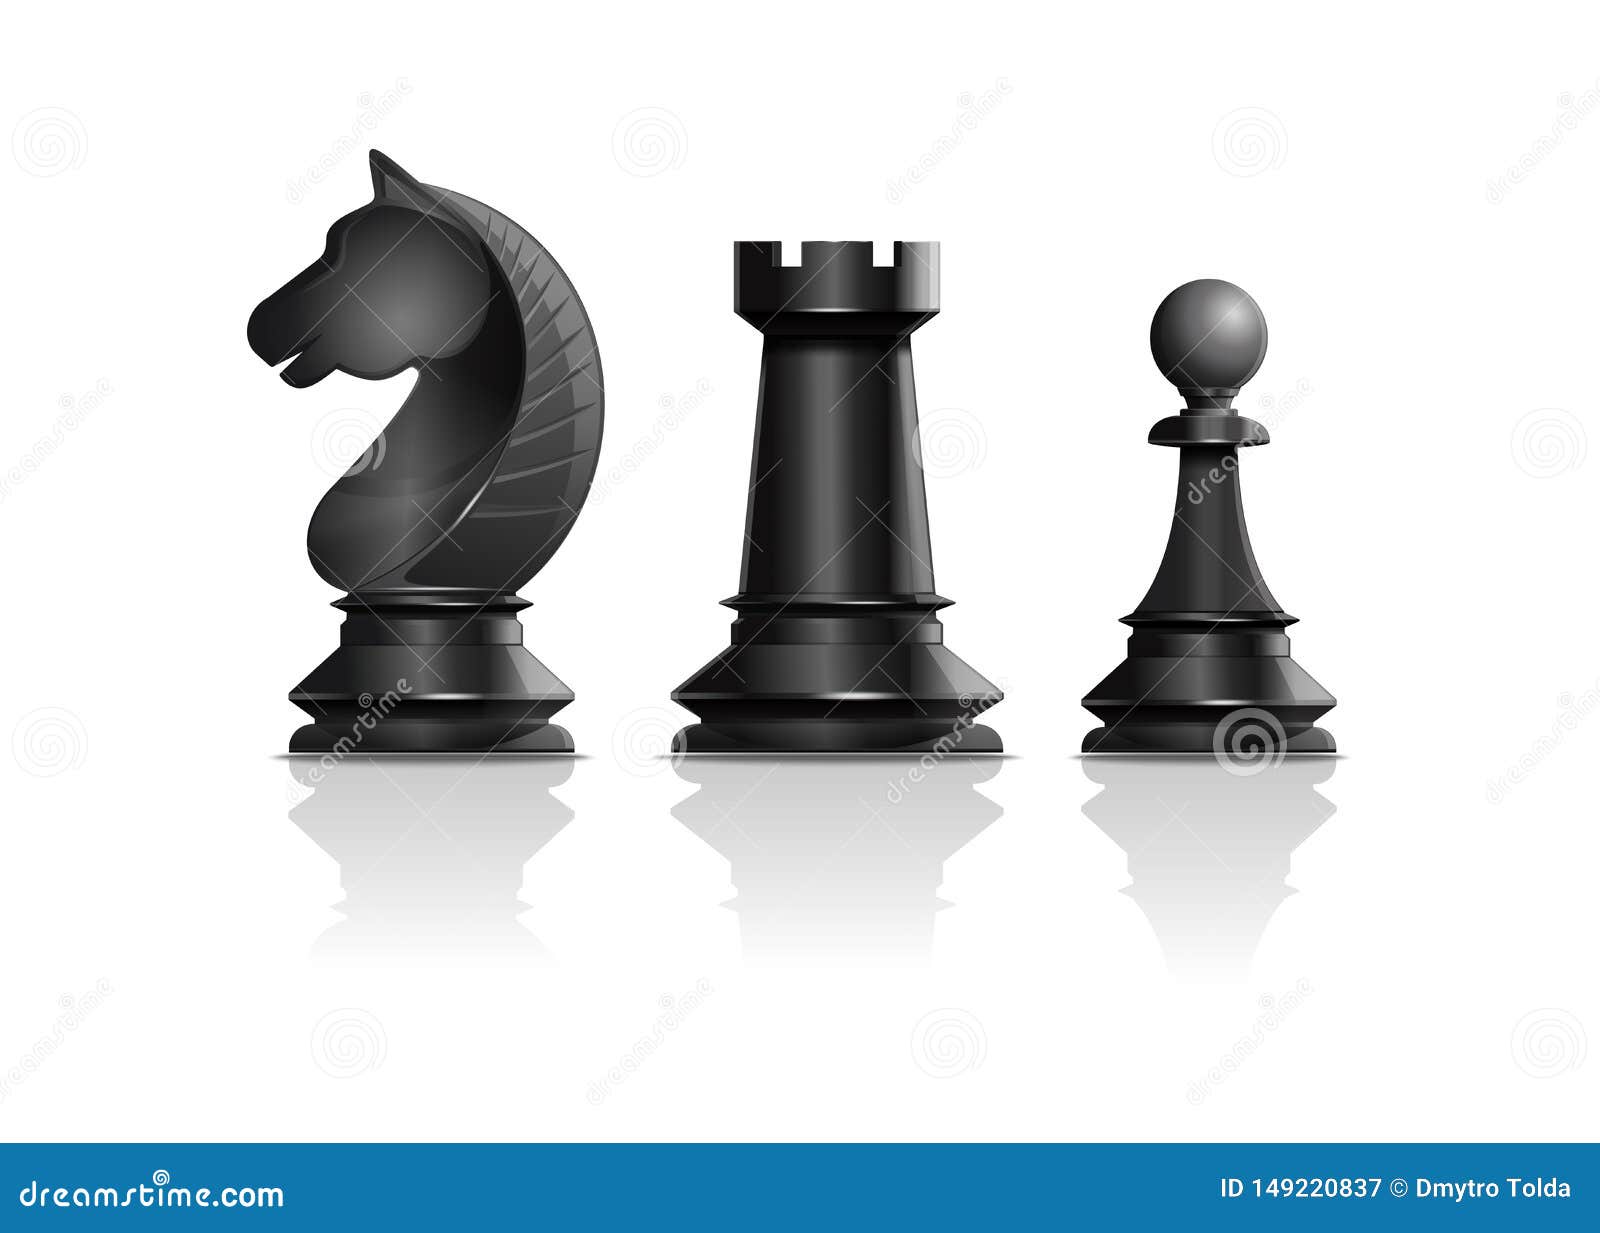 Chess pieces in sketch style. Chess club web background. Hand